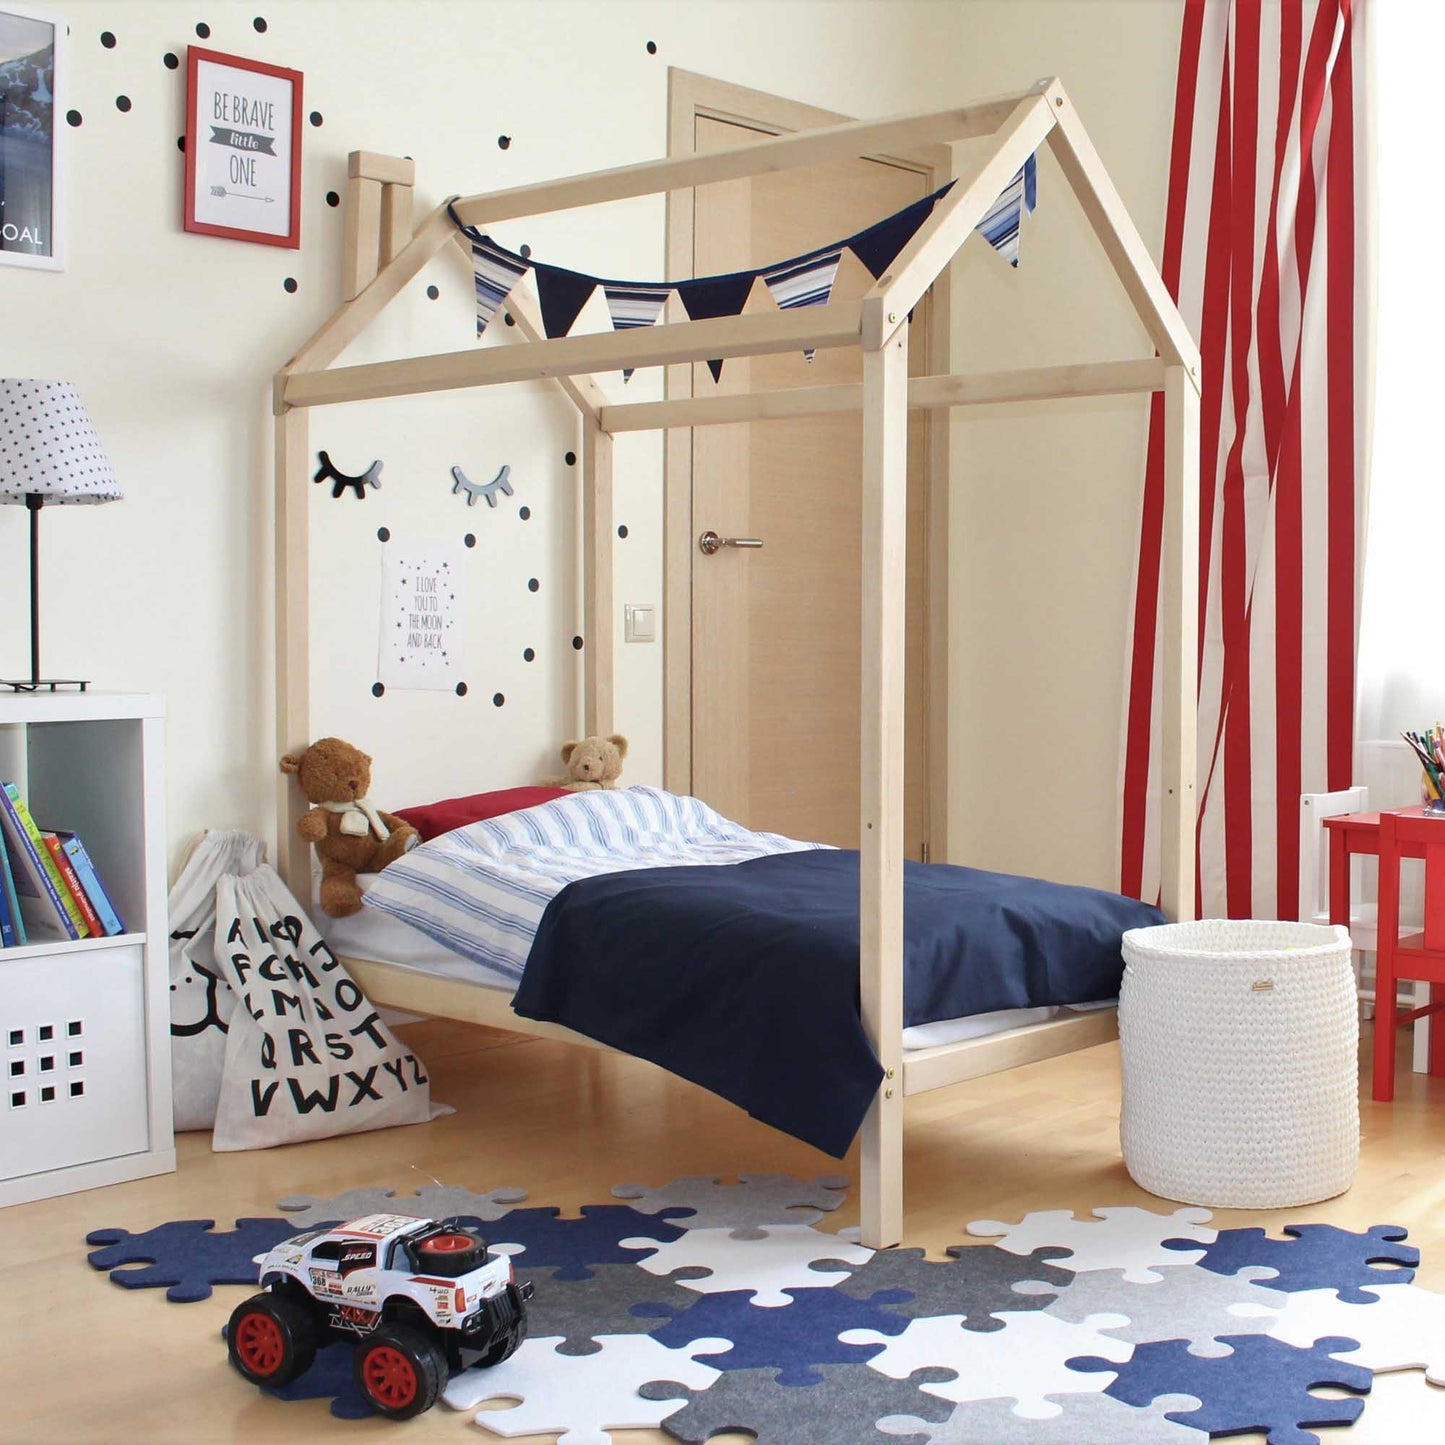 A child's room with a wooden house bed on legs and a rug.